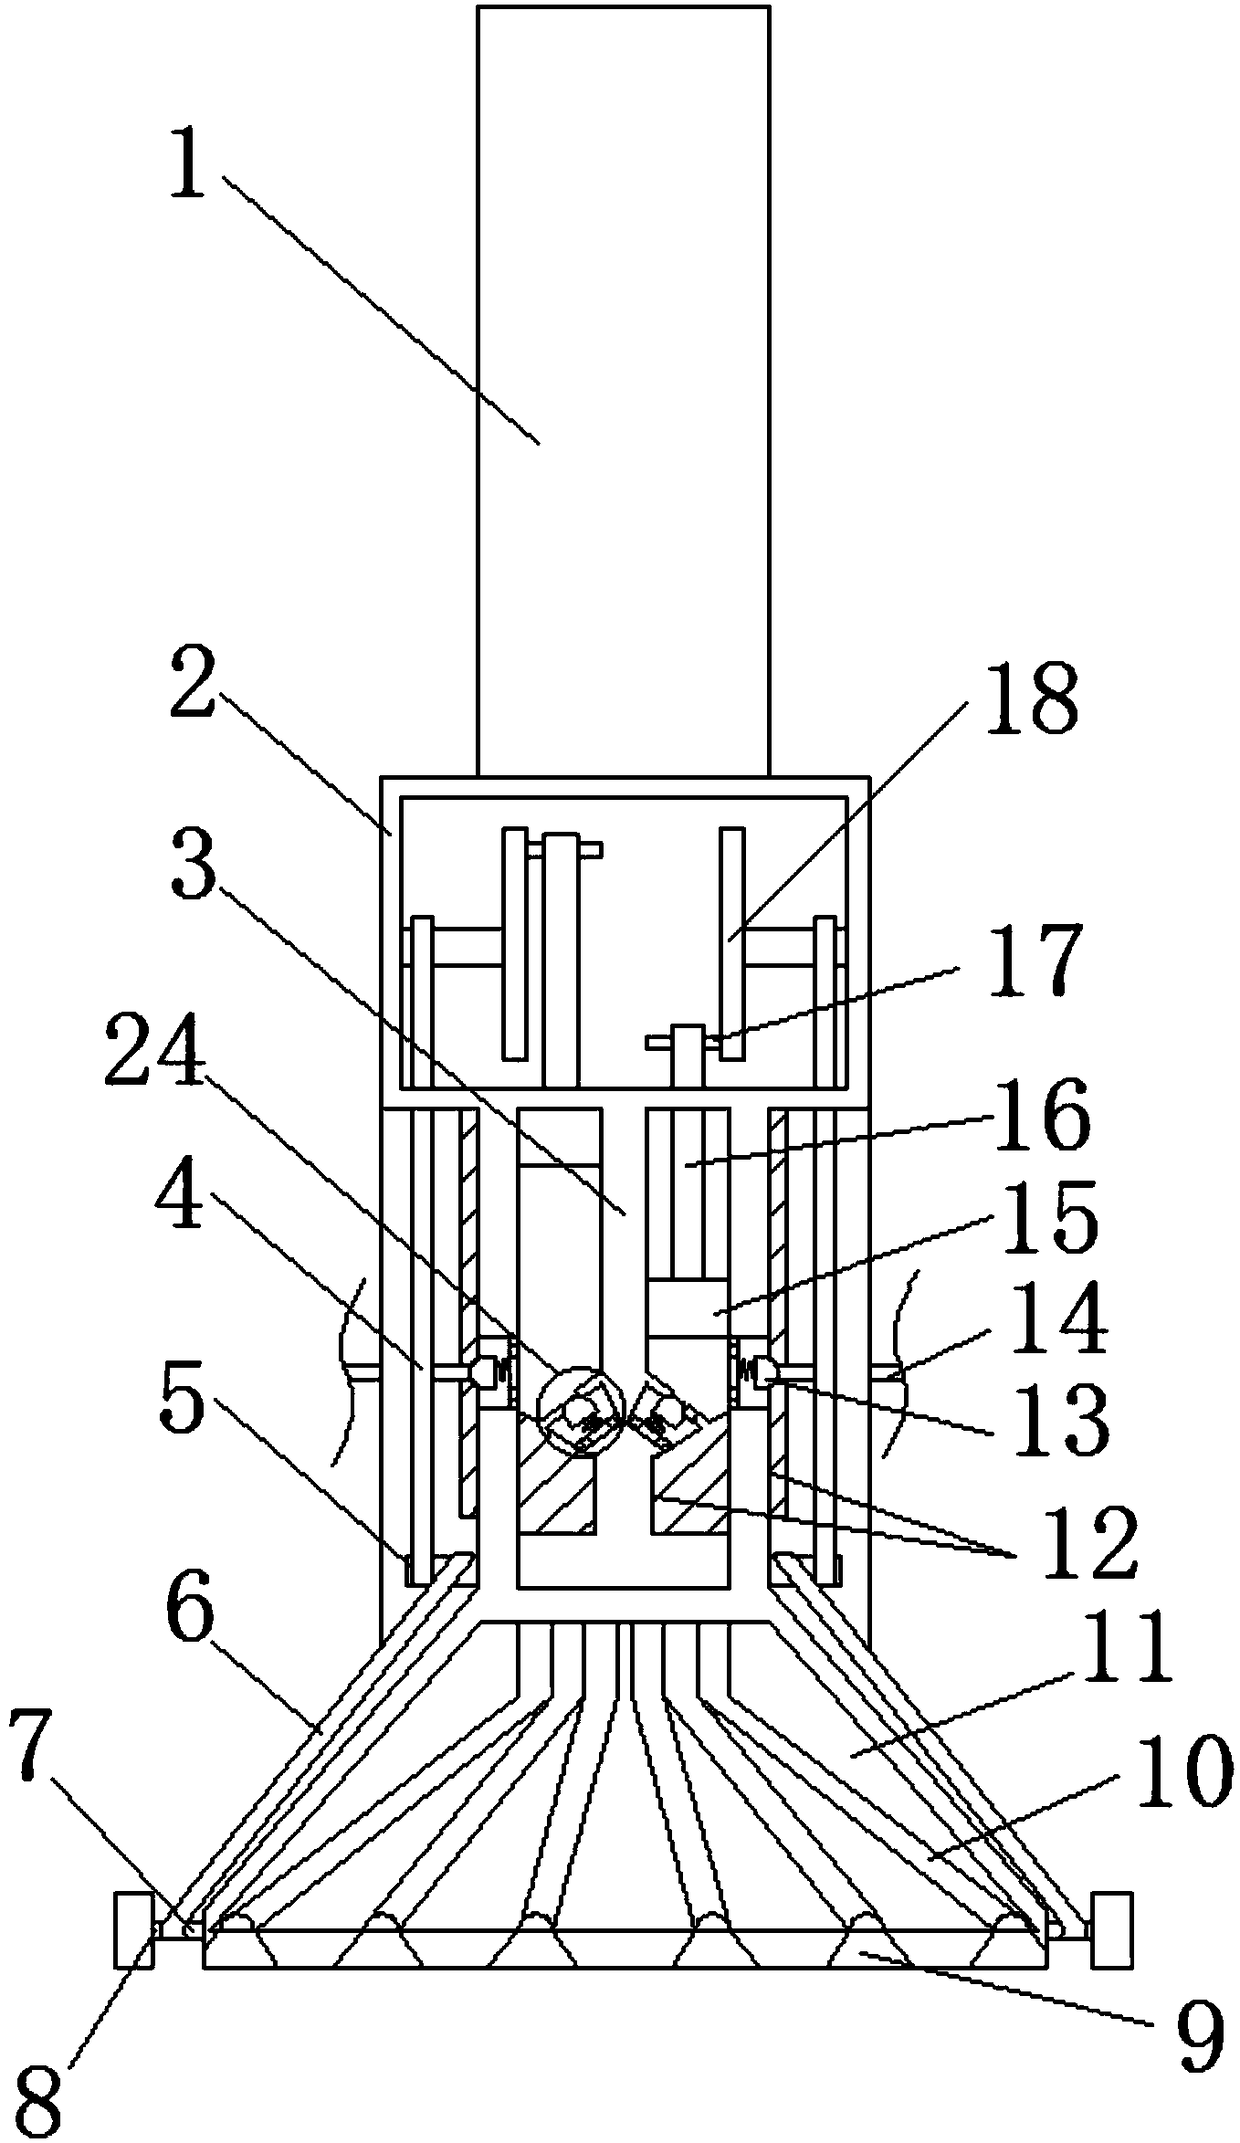 Glue mixing device for wood dust tray processing